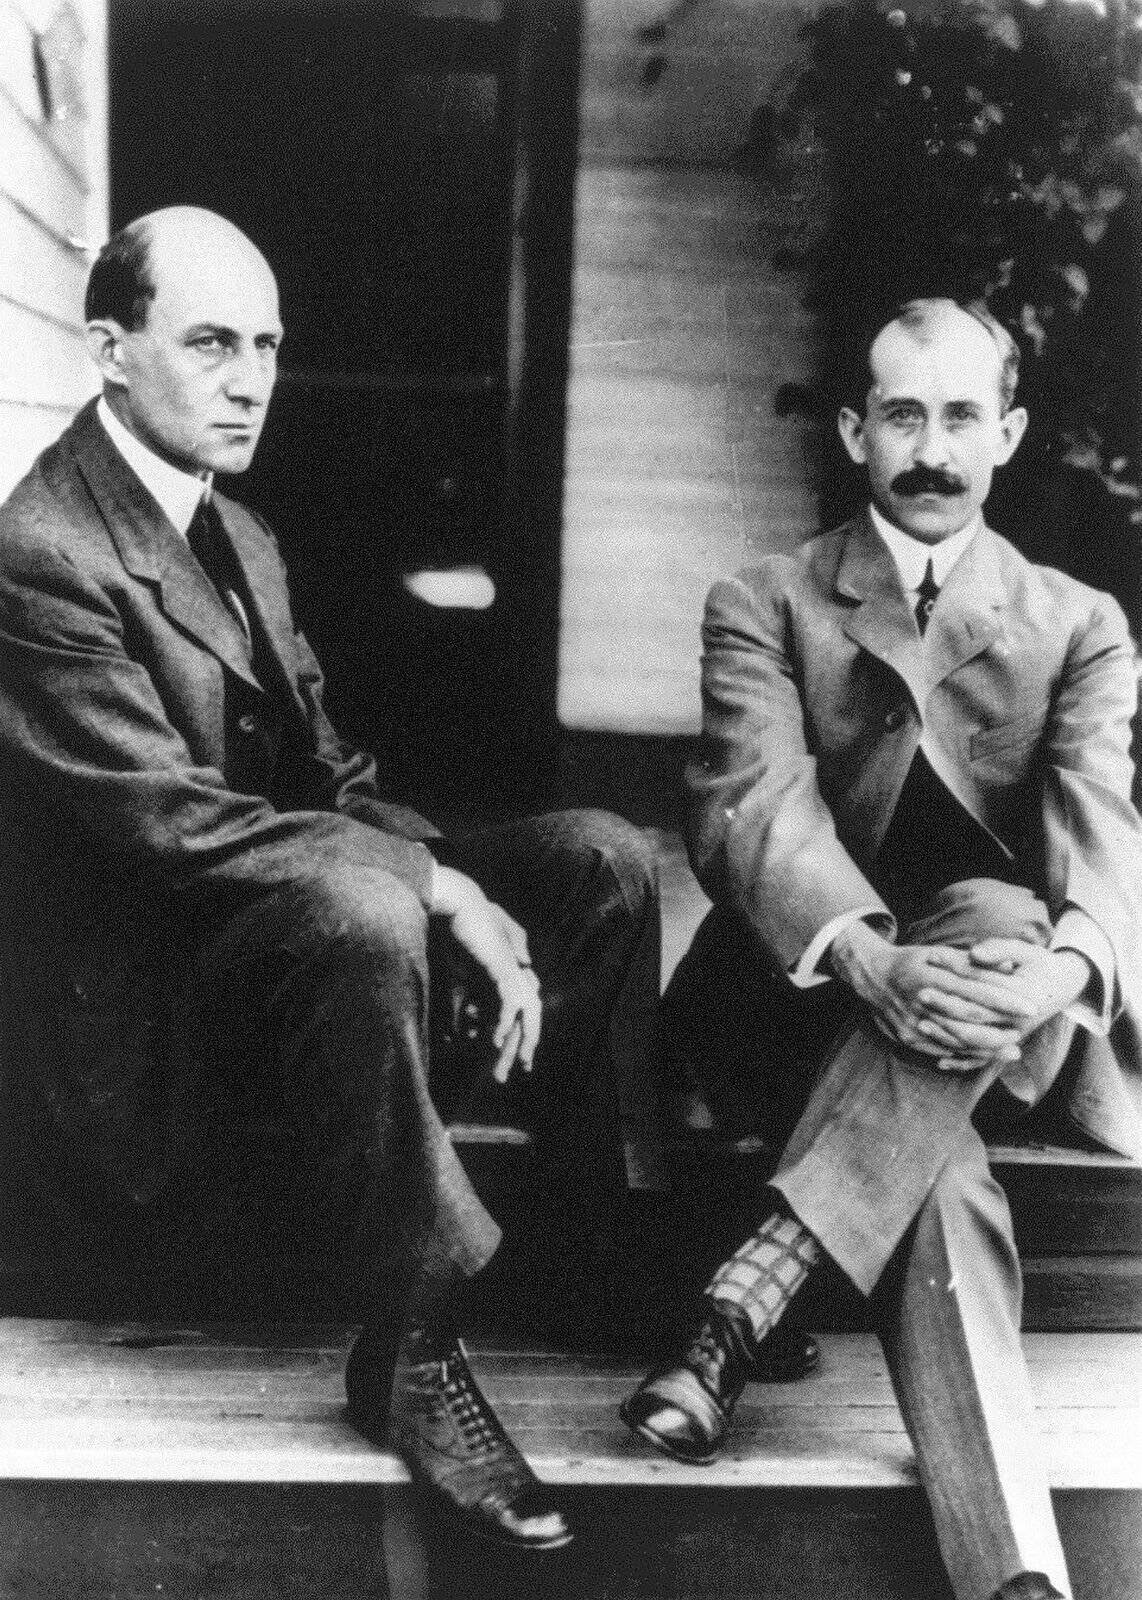 1909 Wright Brothers PHOTO Orville Wilbur DAYTON OHIO,Porch Birthplace Home 1908